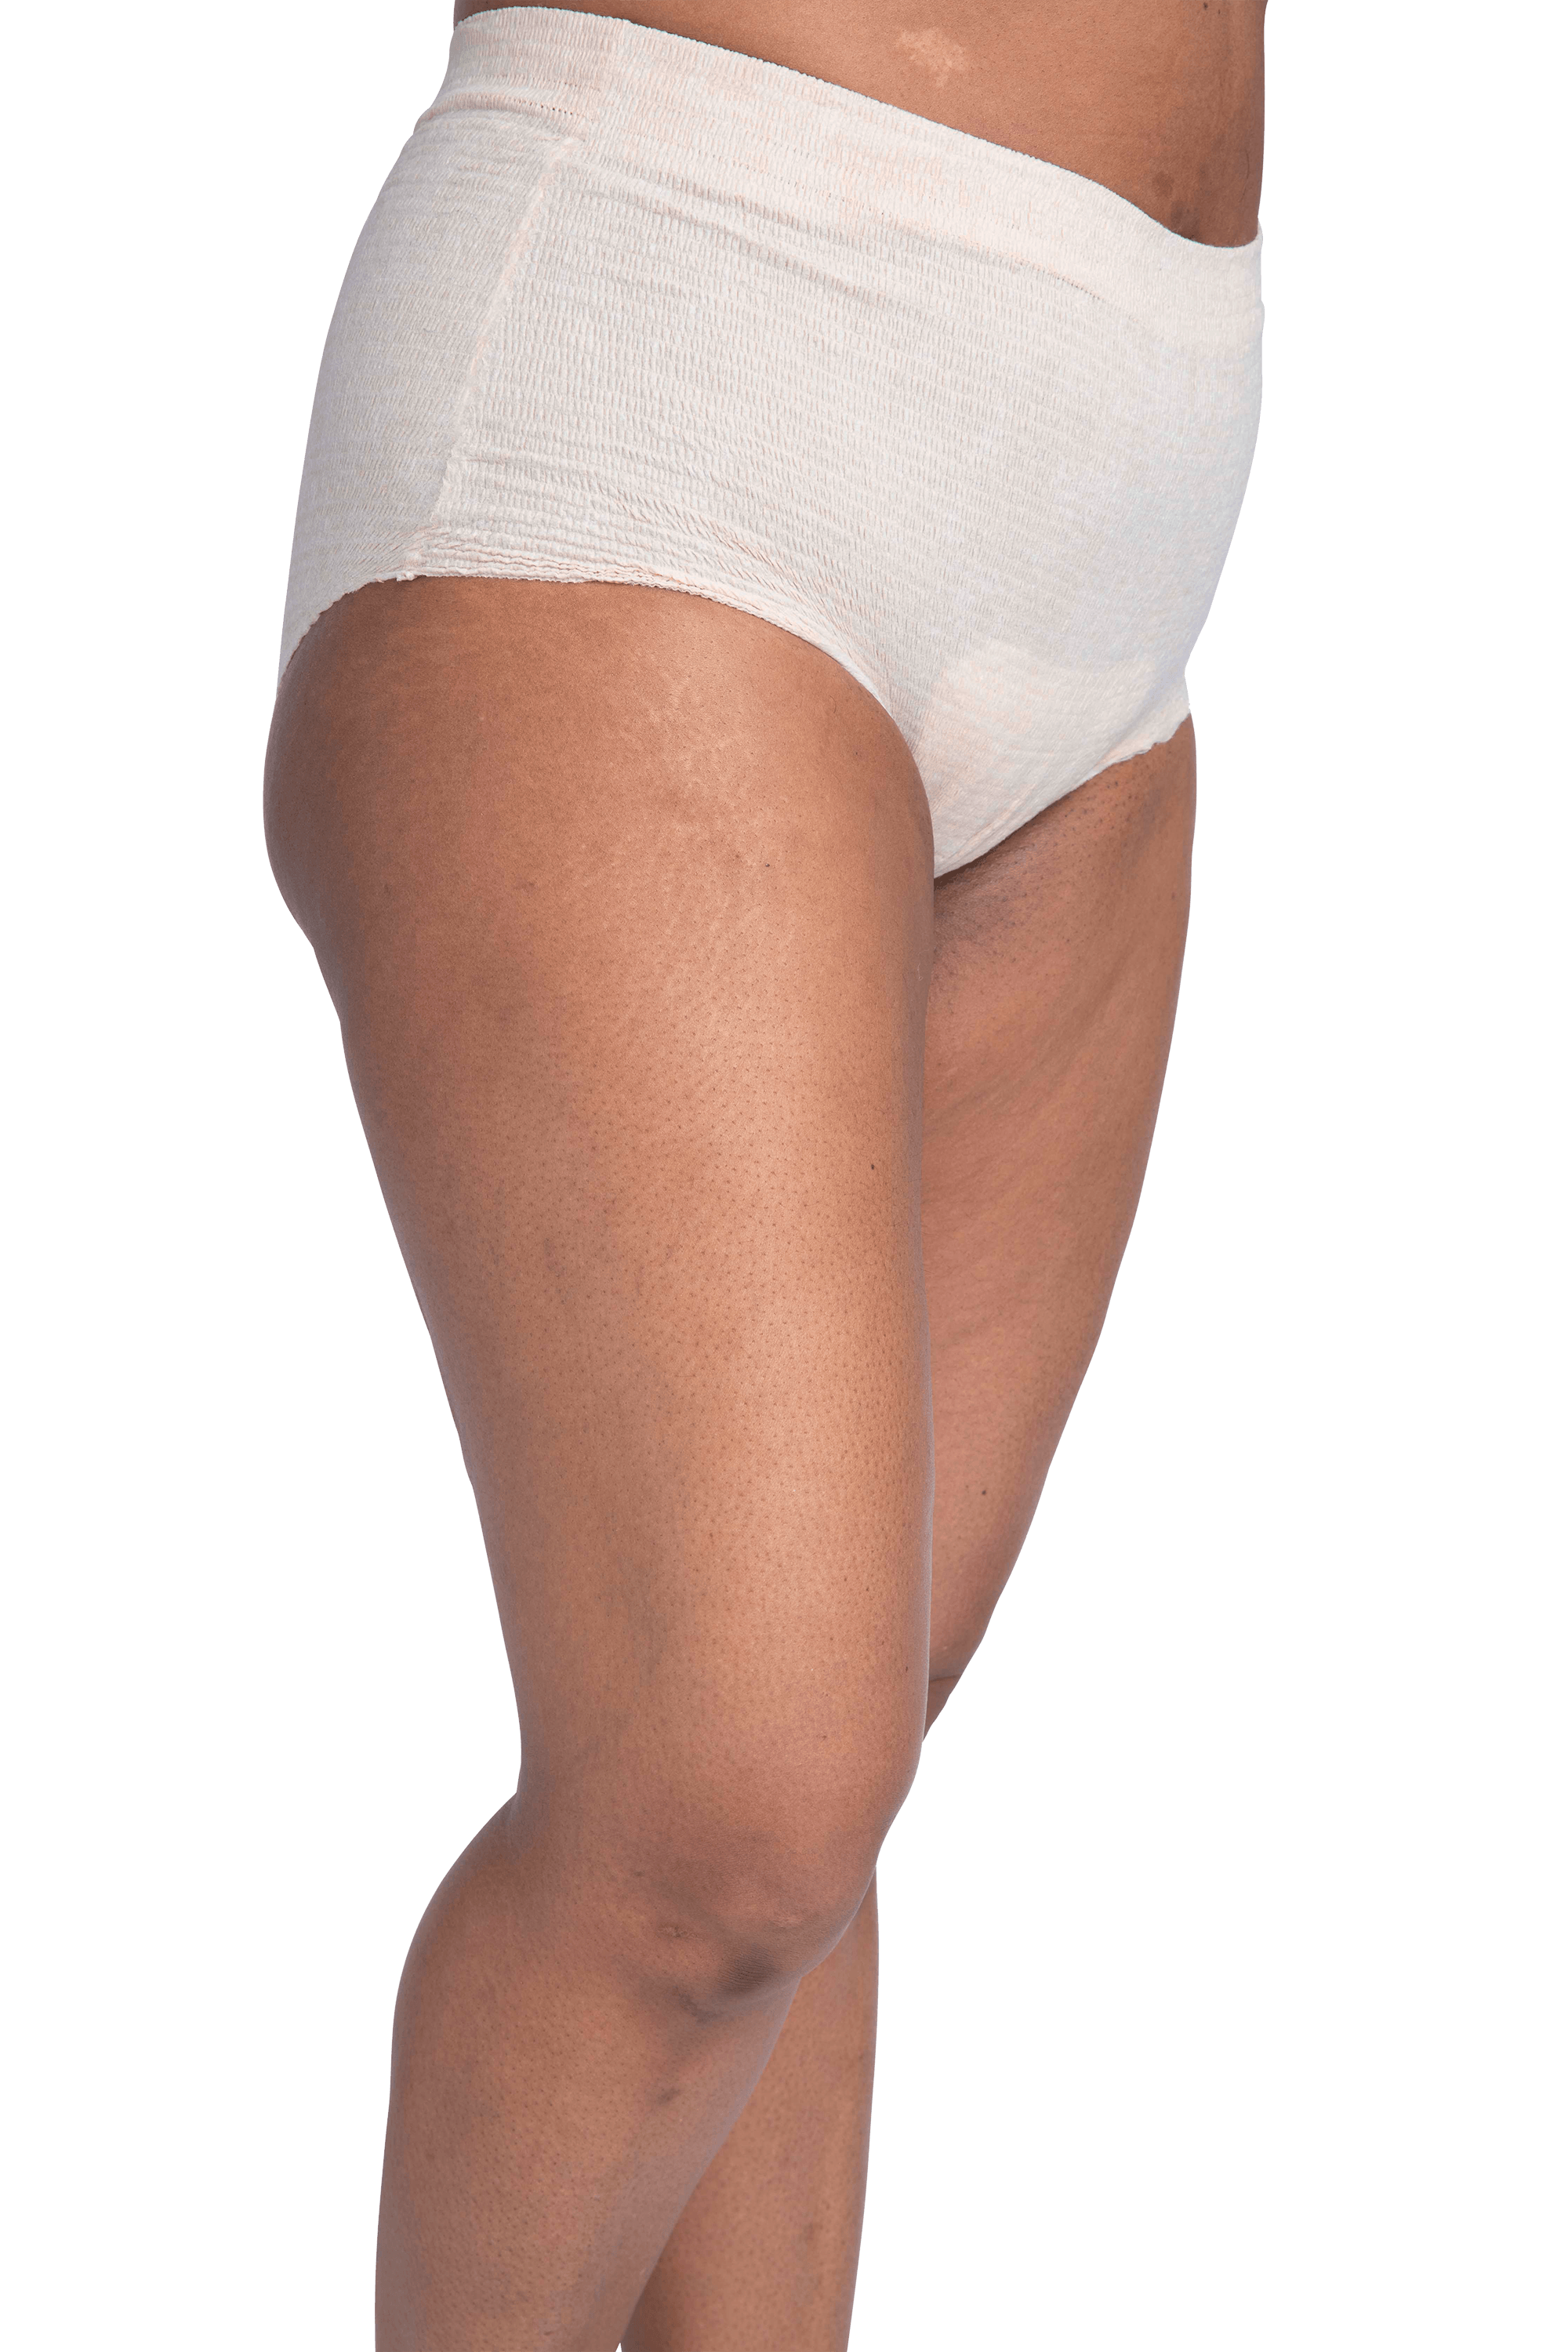 Stretch Super Briefs: Incontinence Briefs For Women and Men 1 Pack